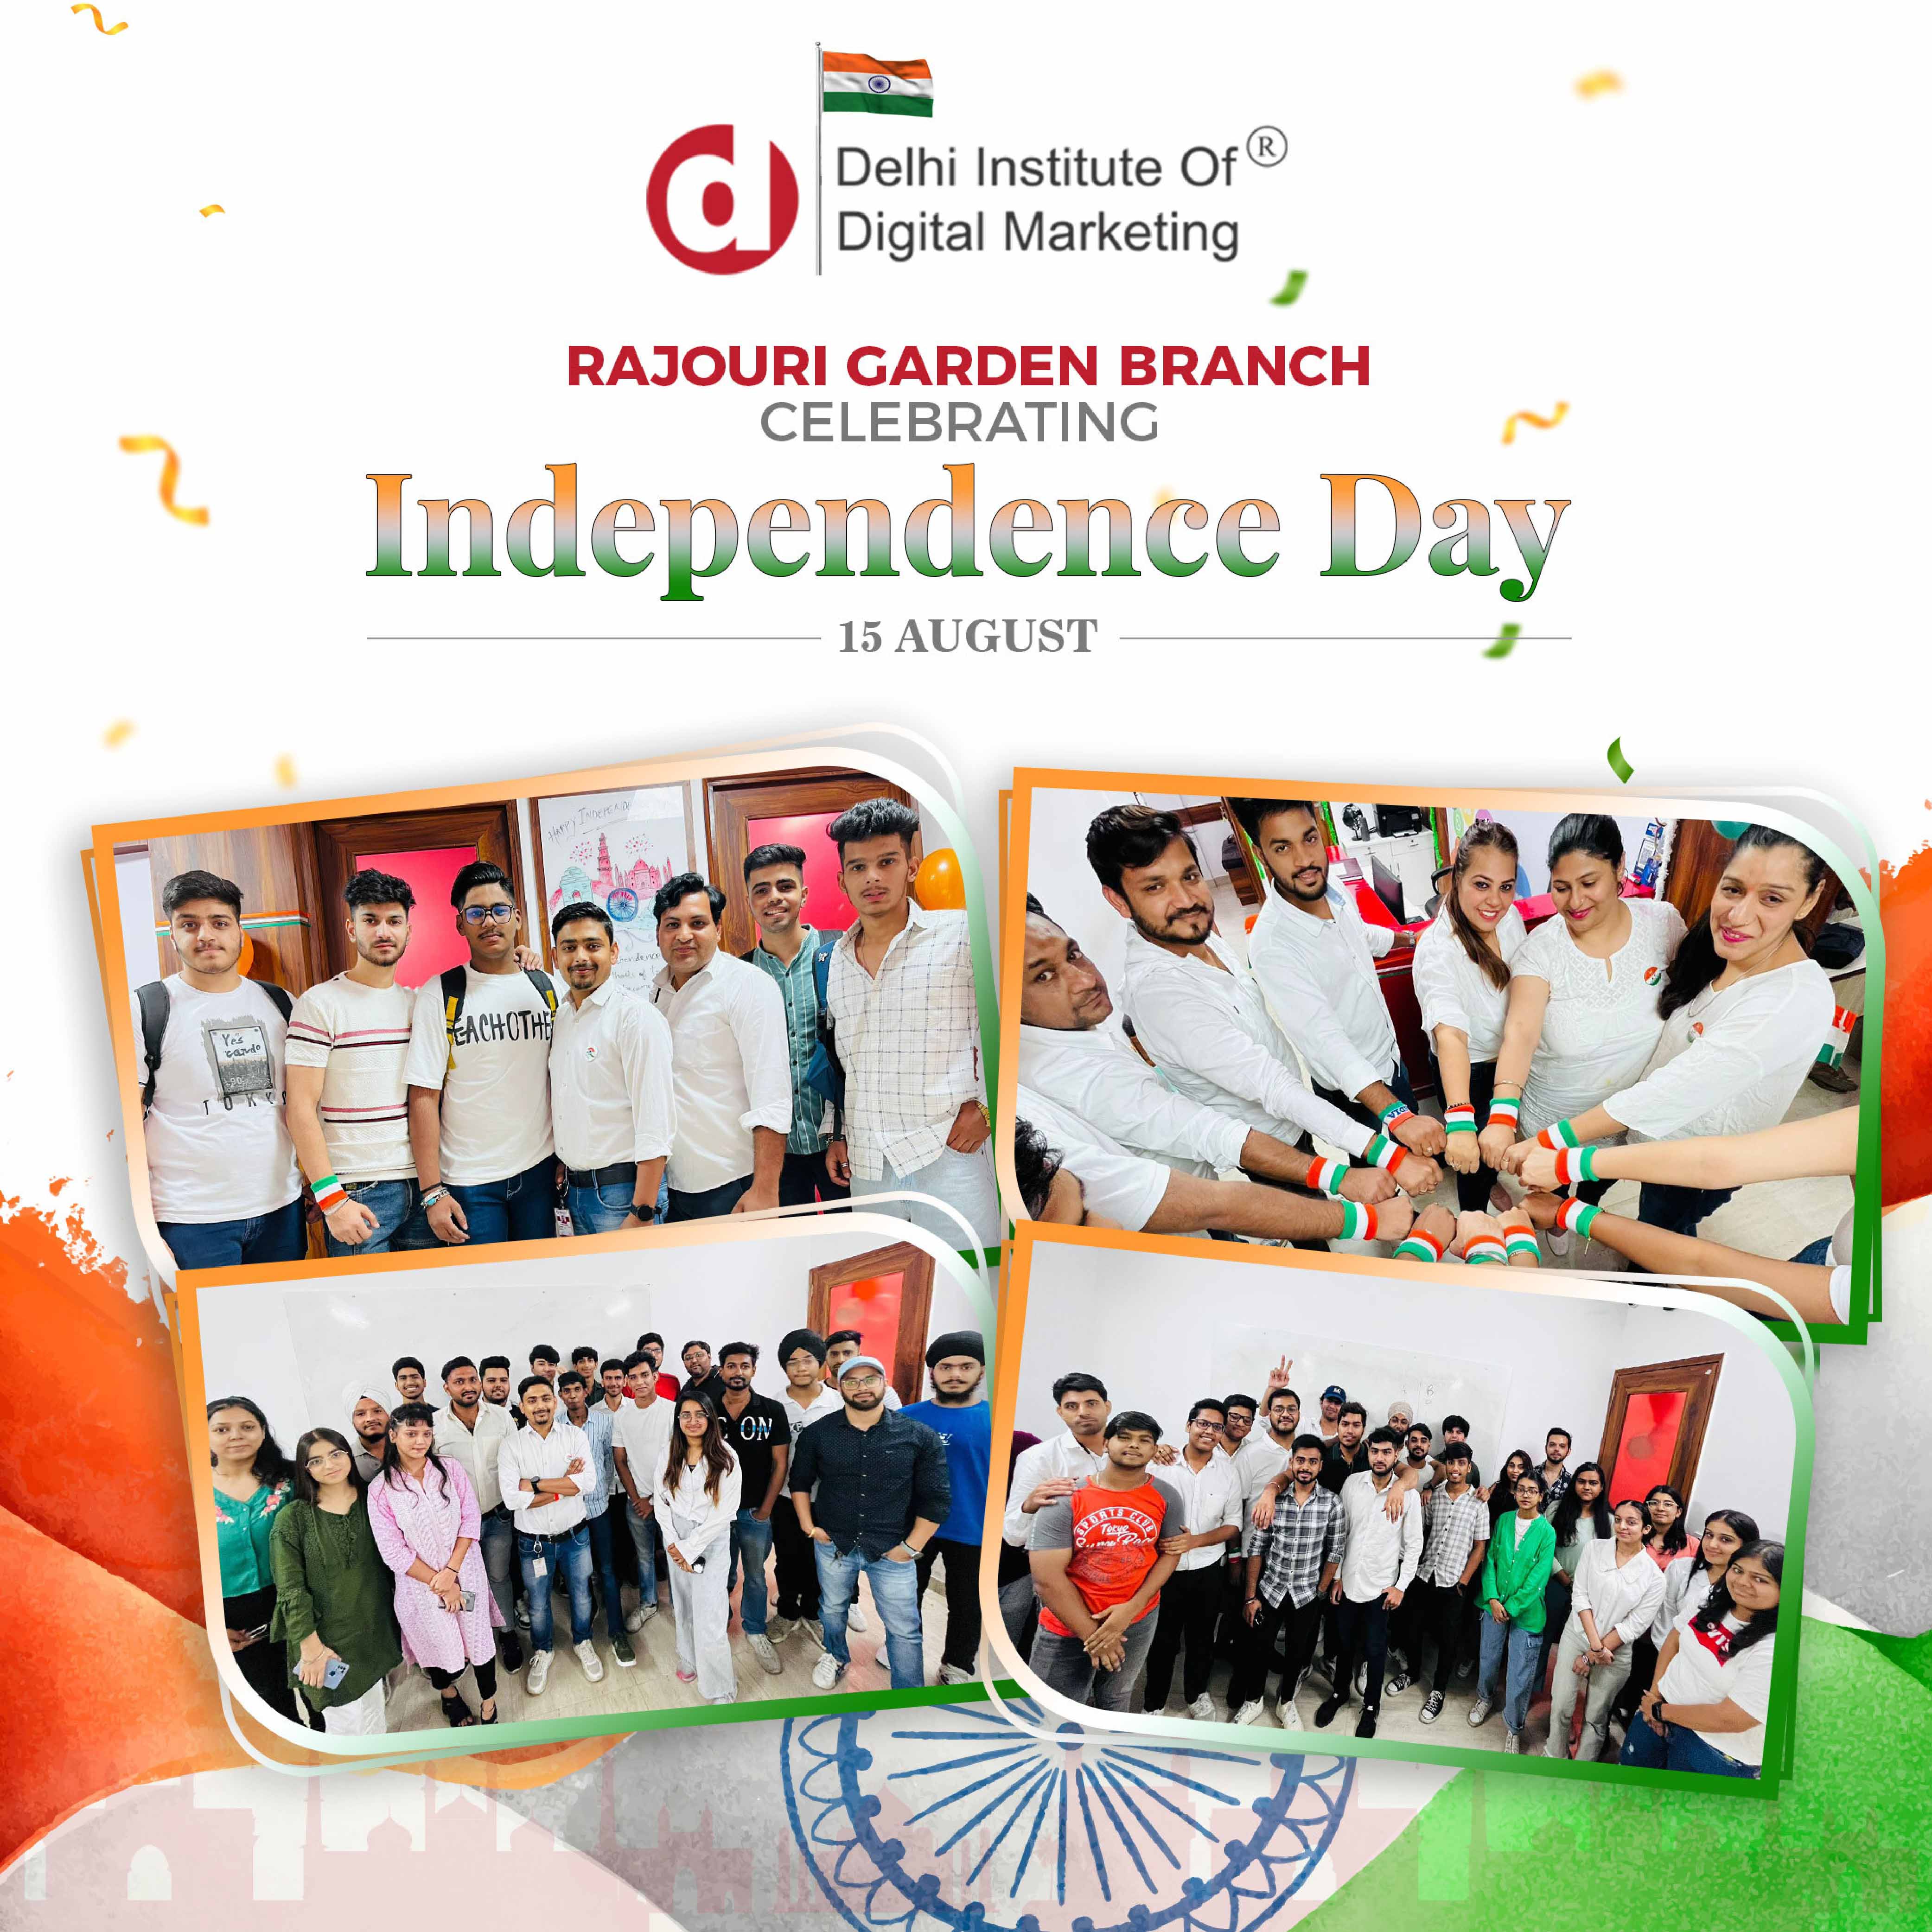 DIDM Rajouri Garden Branch is celebrating its 77th Independence Day